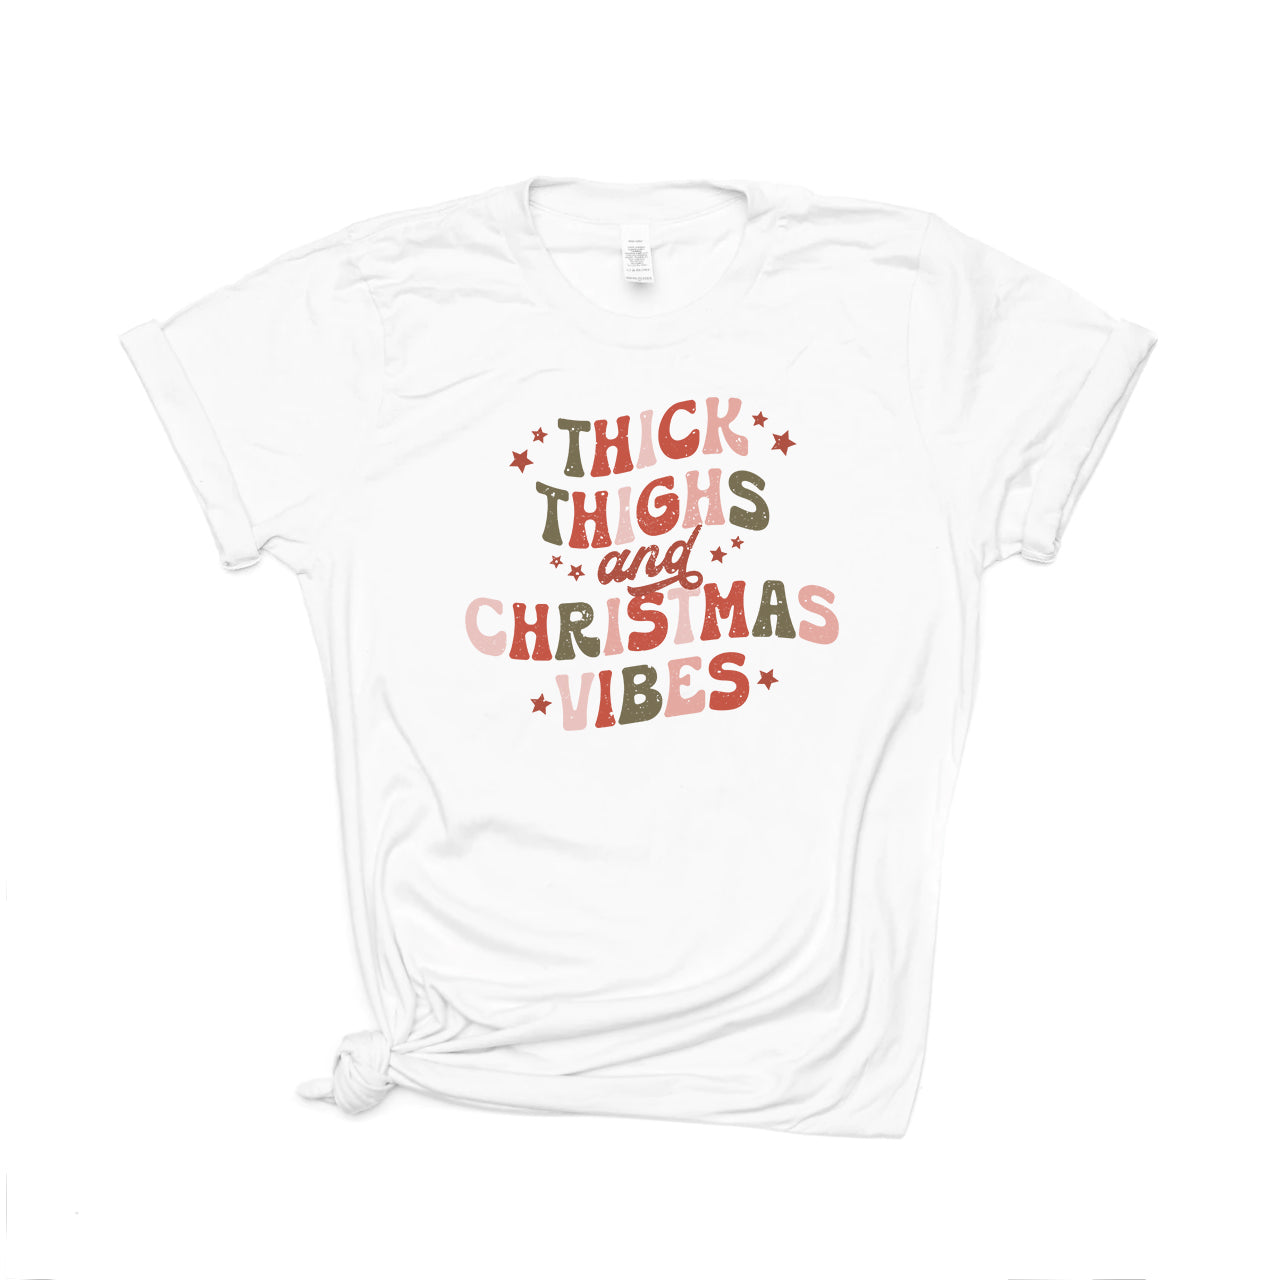 Thick Thighs and Christmas Vibes - Tee (White)